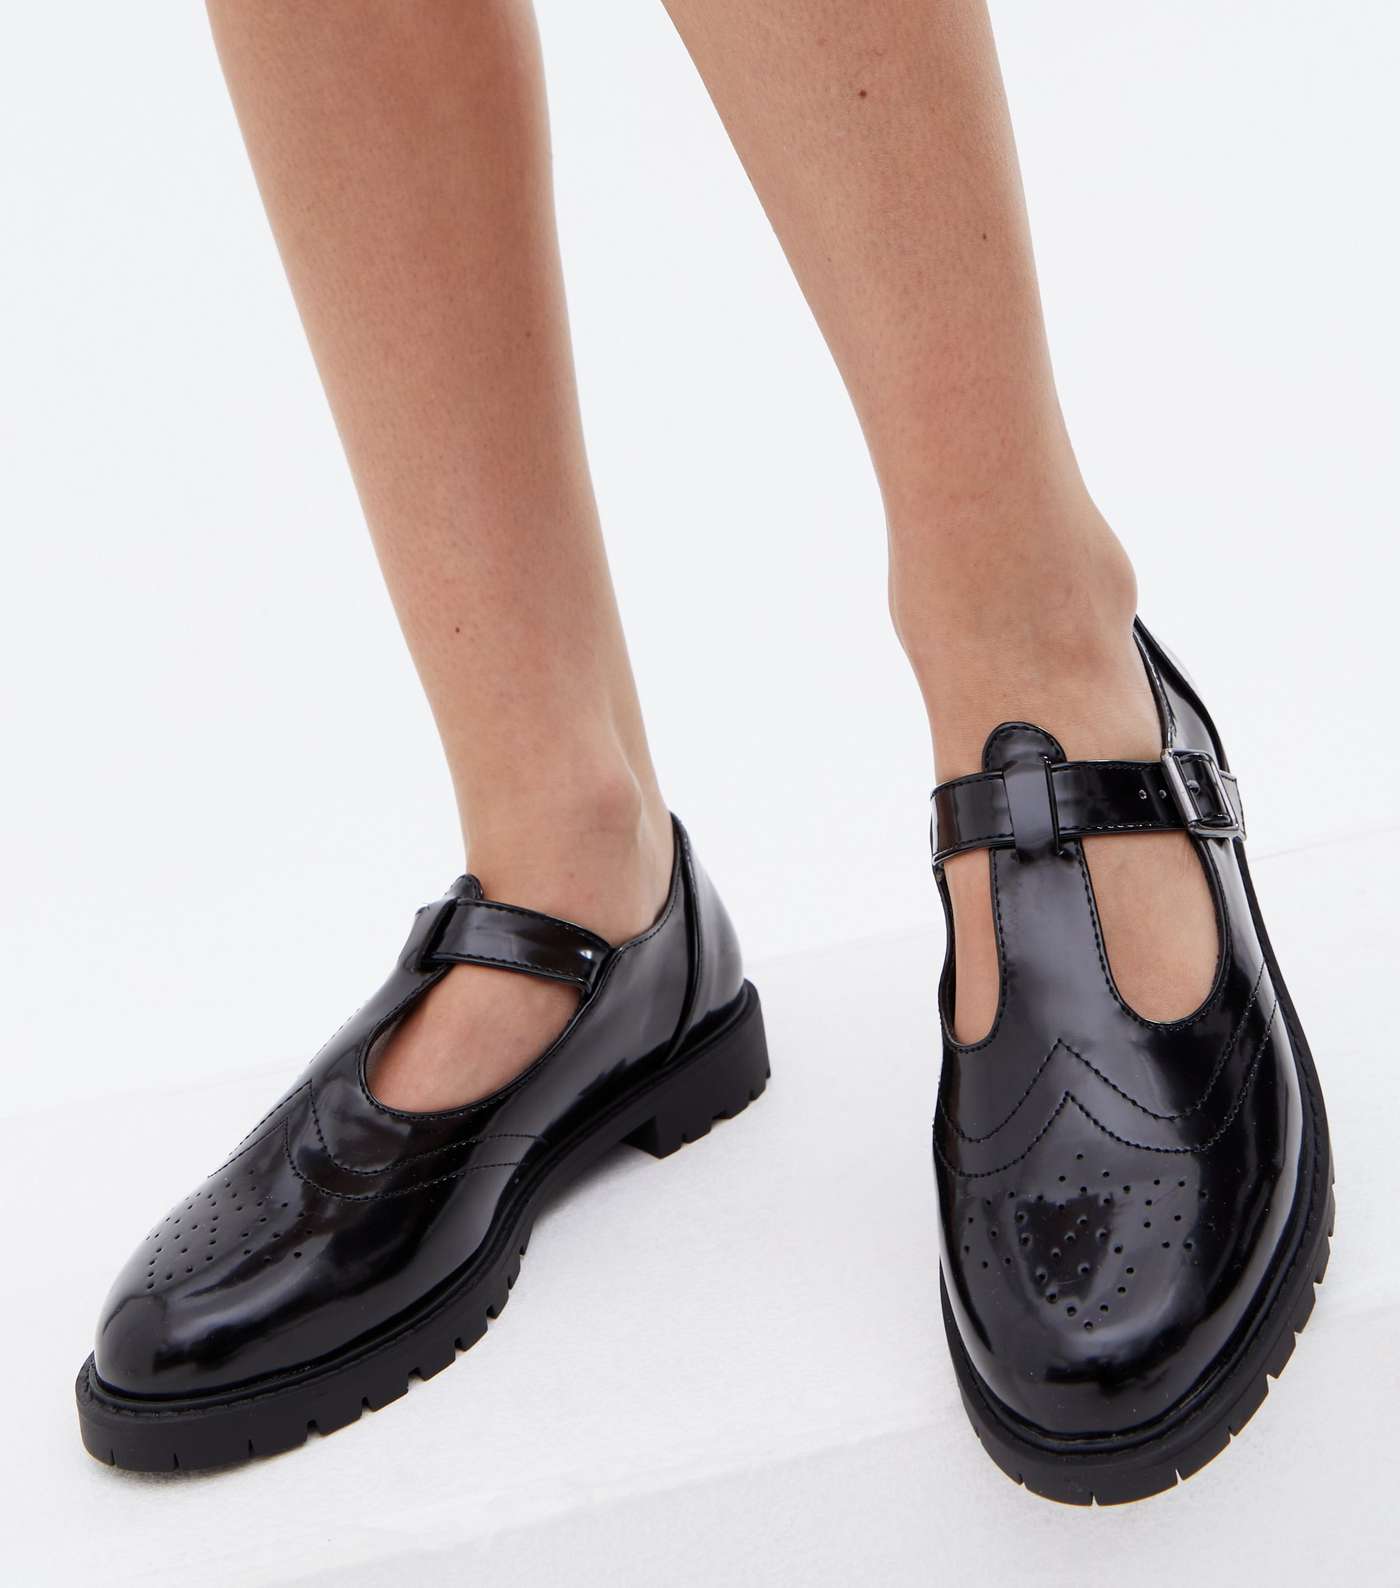 Wide Fit Black Patent Perforated Mary Jane Shoes Image 2